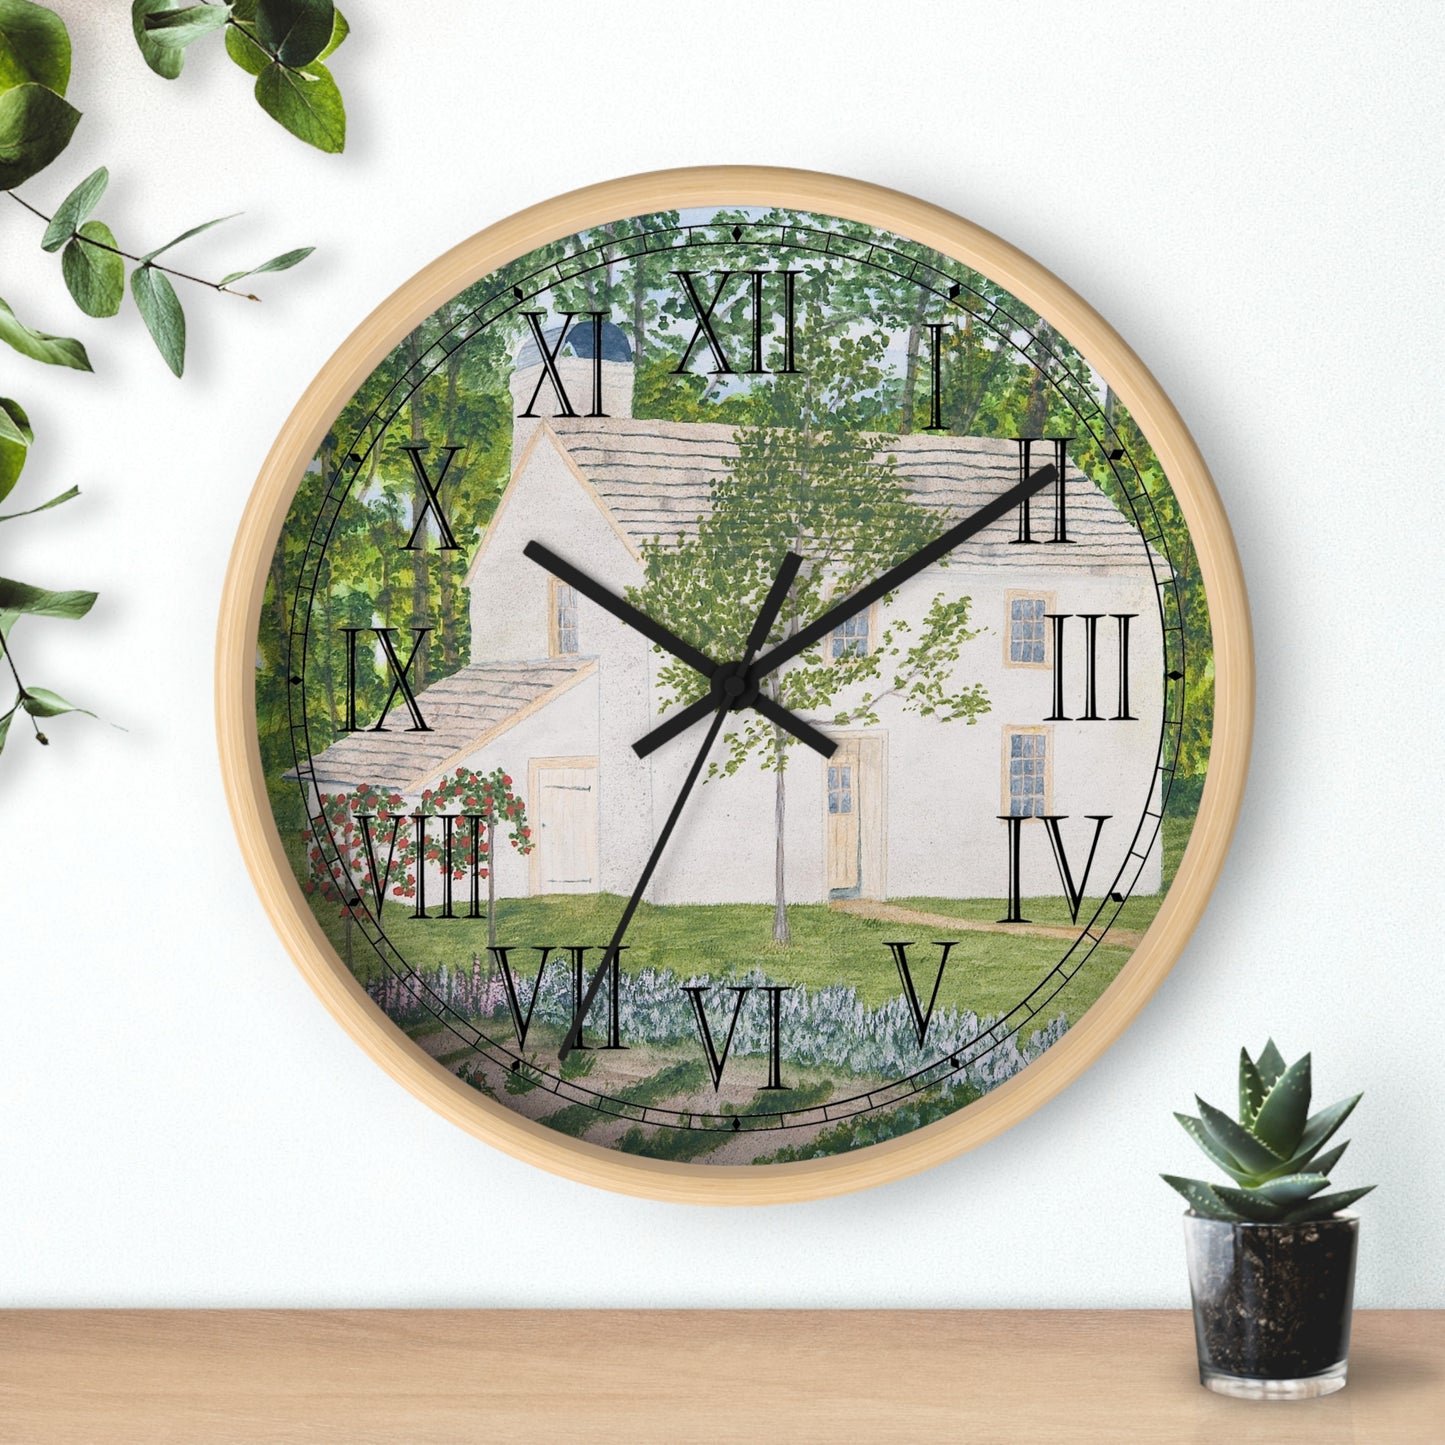 The Country Garden Roman Numeral Clock features a reproduction of a watercolor painting by artist Lee M. Buchanan. This clock will add a class touch to any room in your home.